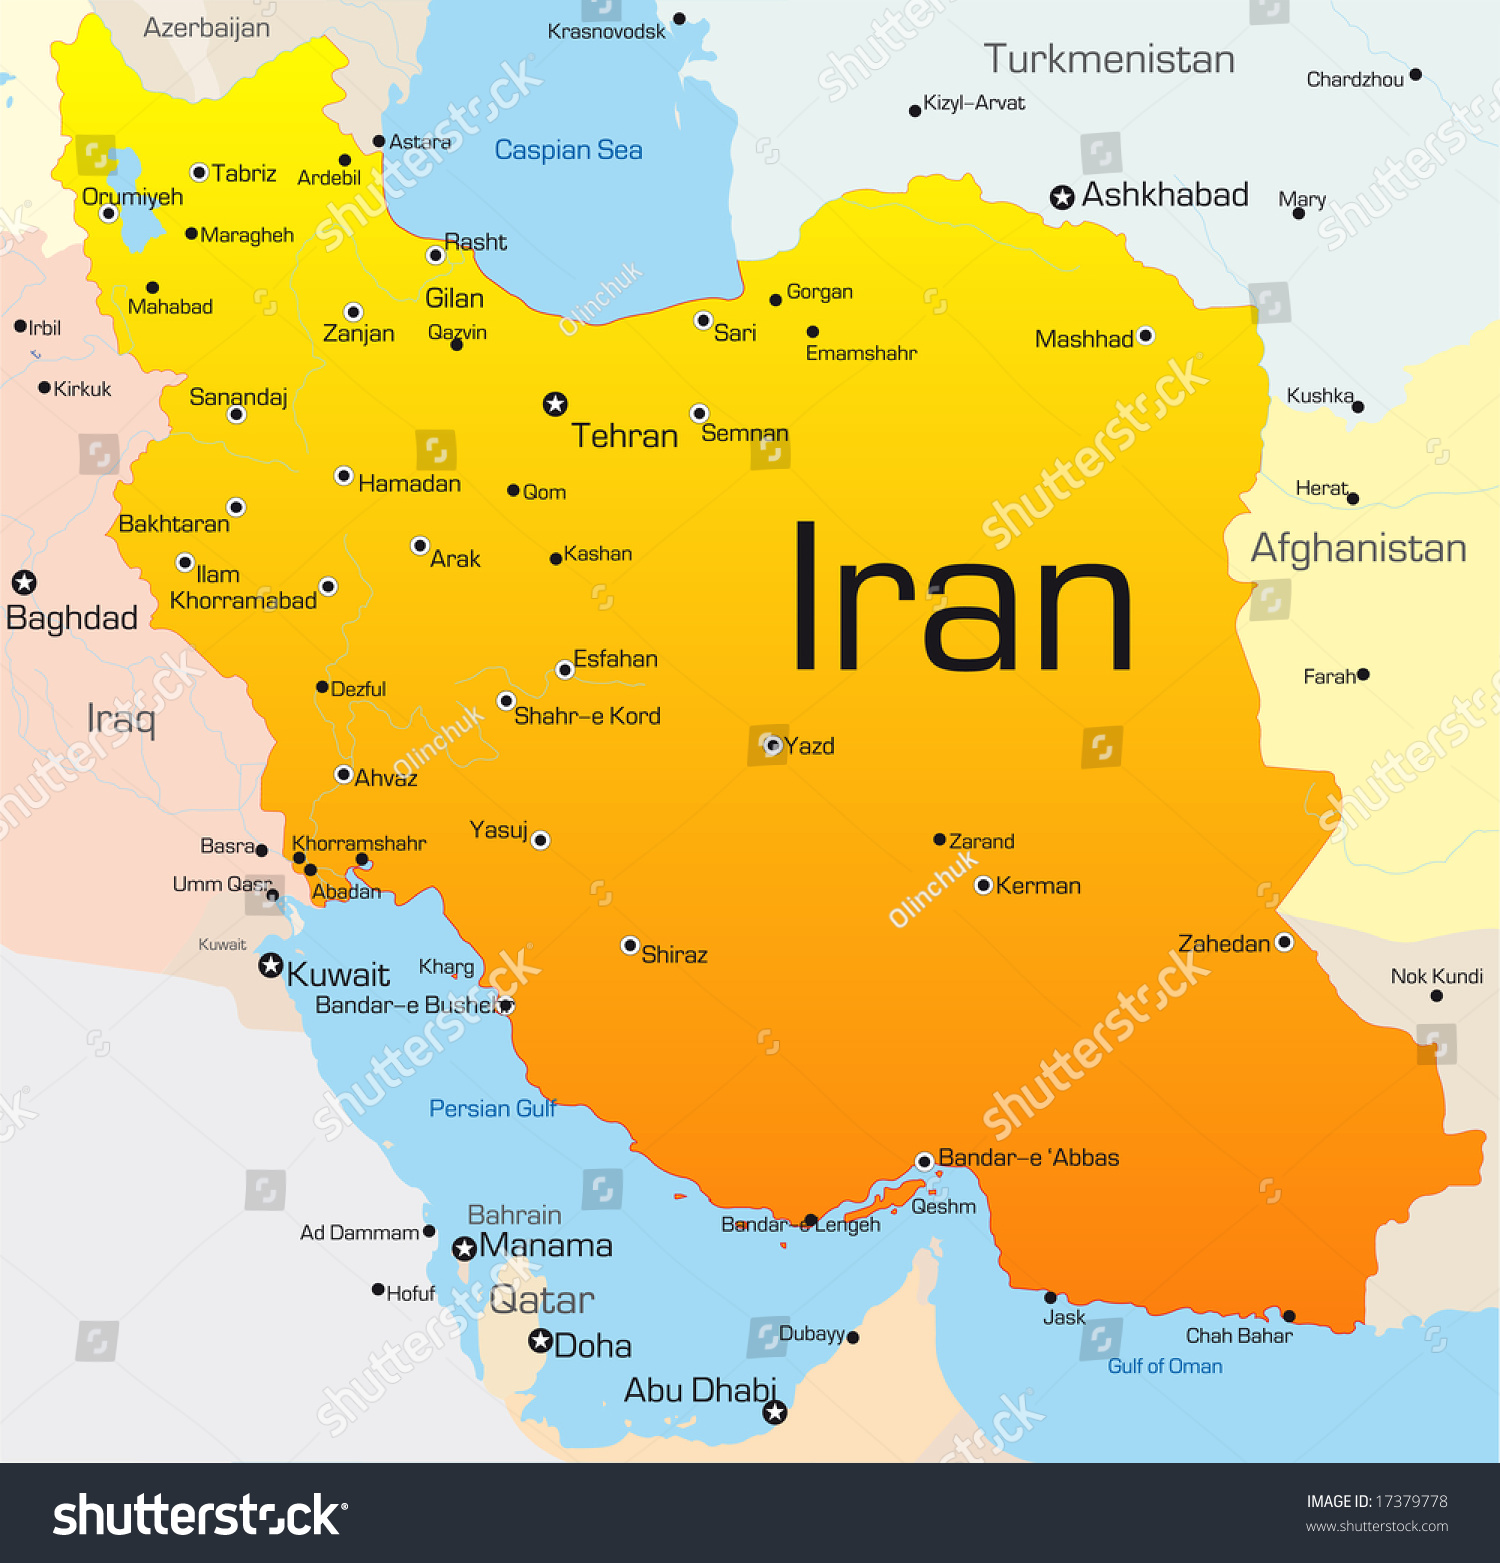 Abstract Vector Color Map Of Iran Country - 17379778 : Shutterstock